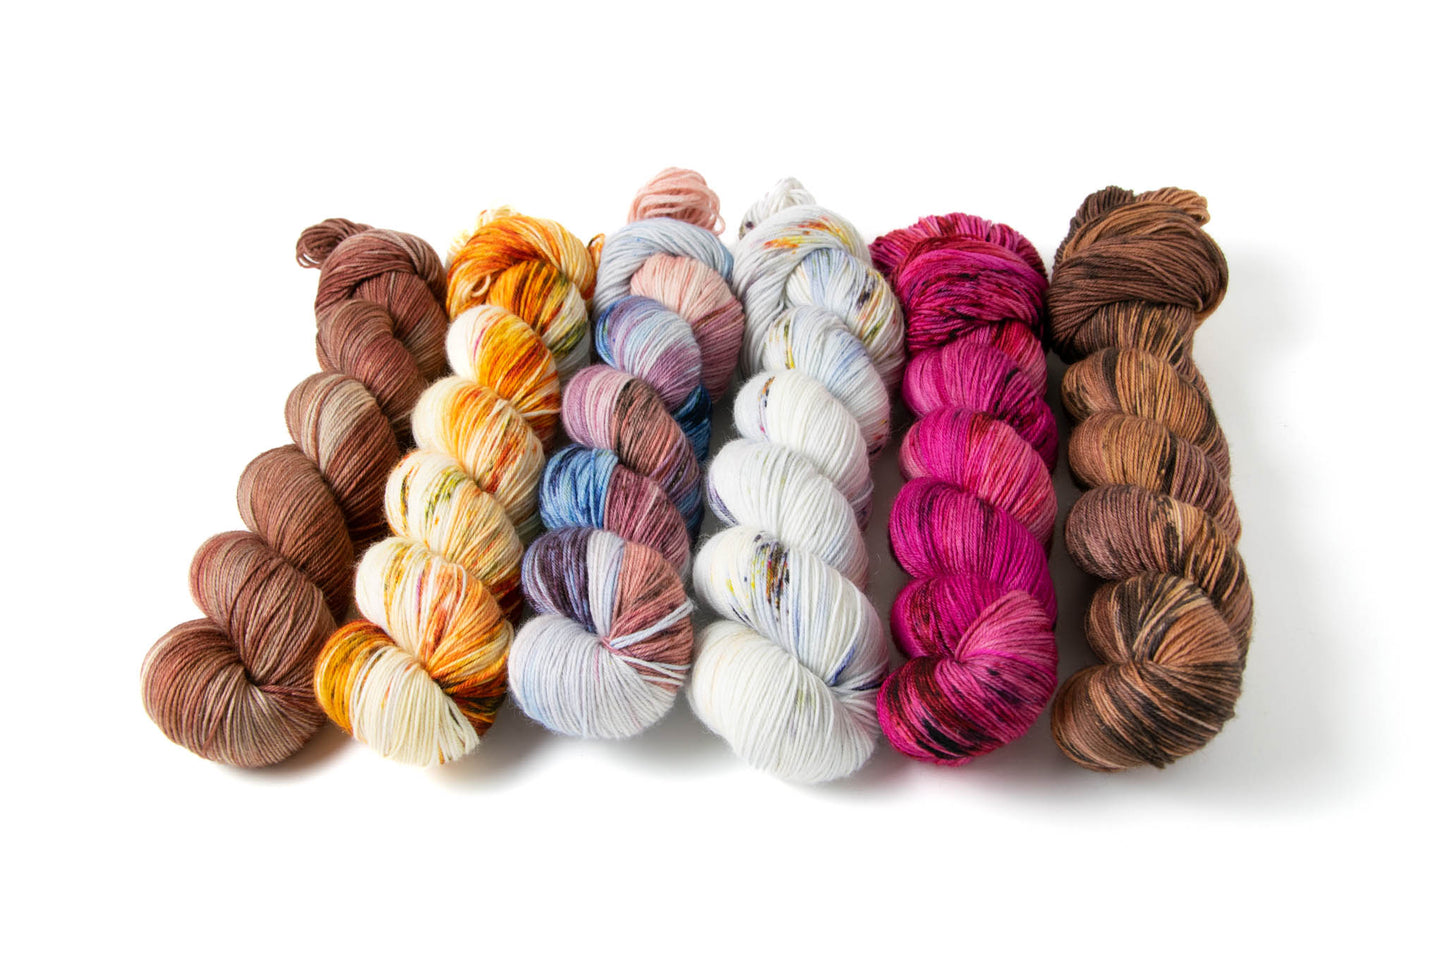 The six variegated skeins in the collection: a dusty tan with brick red accents; a bright red, orange, and green on a white background; a many-shaded blue, mauve, and pink; a bright fuchsia with dark magenta accents; and a warm orange-brown with sections of deeper and cooler browns.